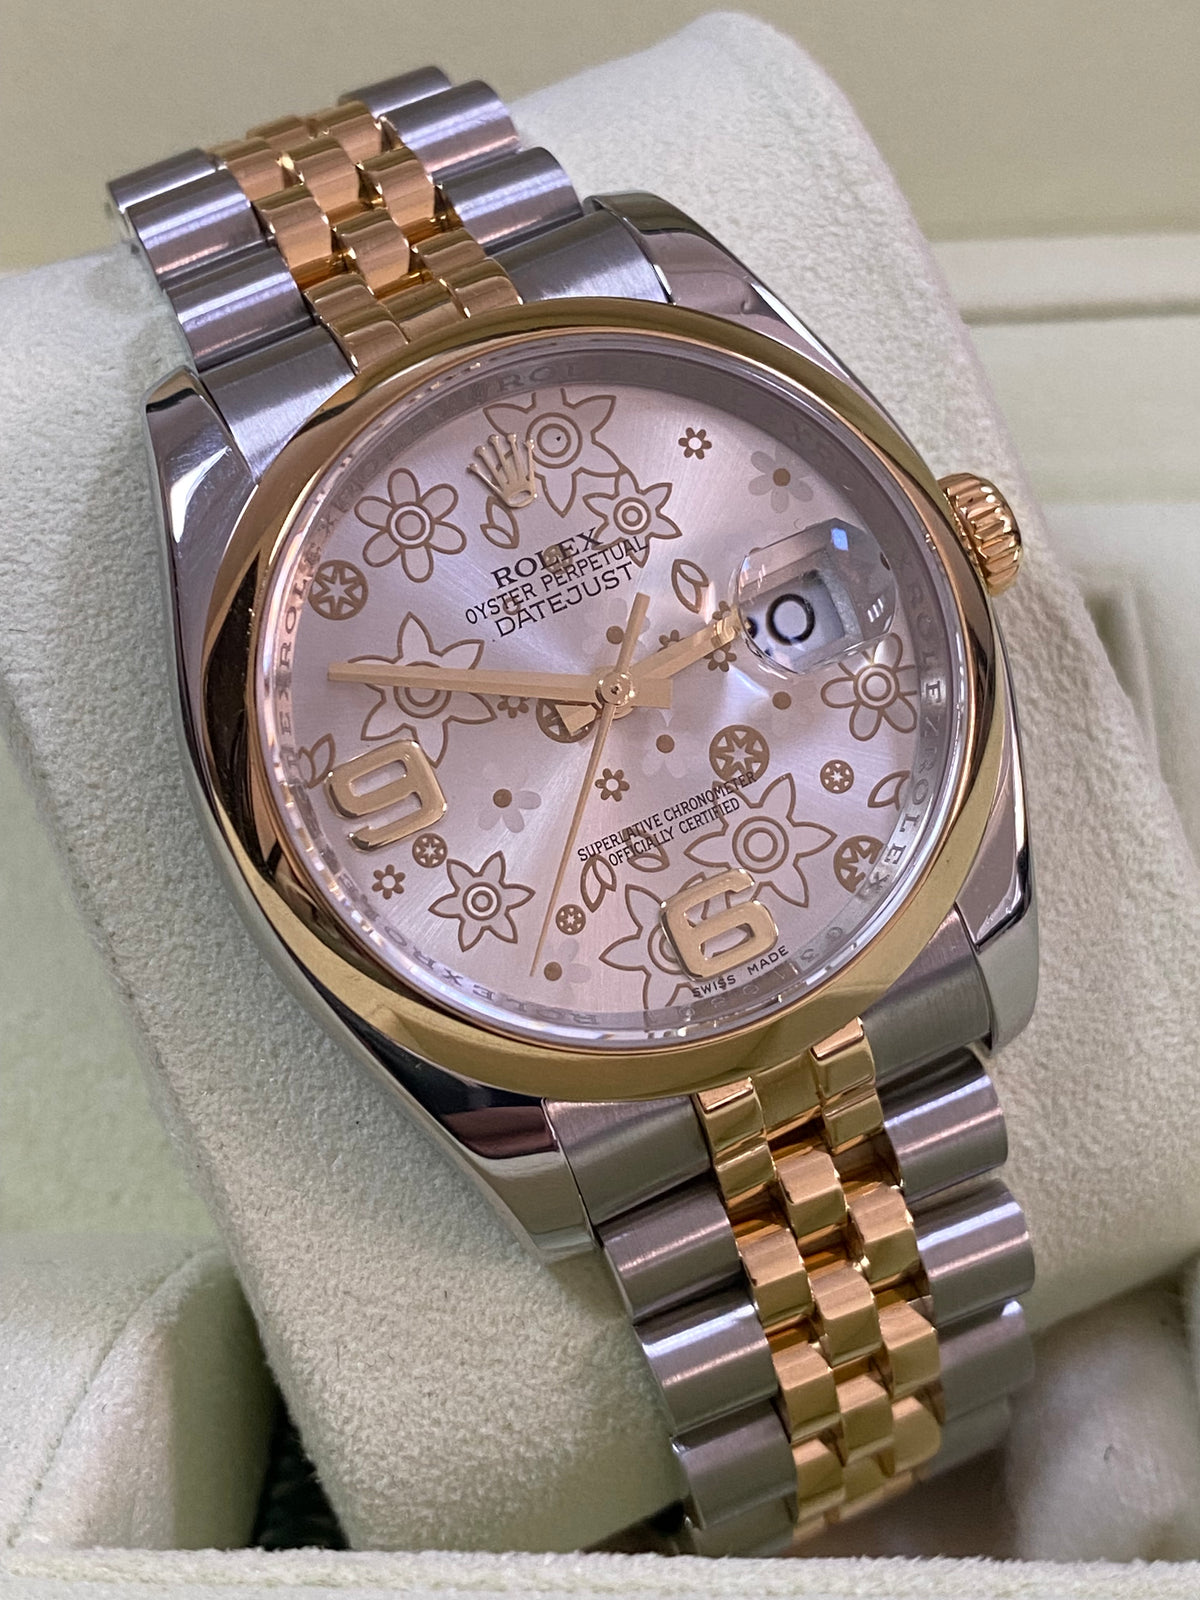 Rolex Steel and Yellow Gold Datejust 36 - Silver Floral Motif Dial -Jubilee Bracelet - 116203